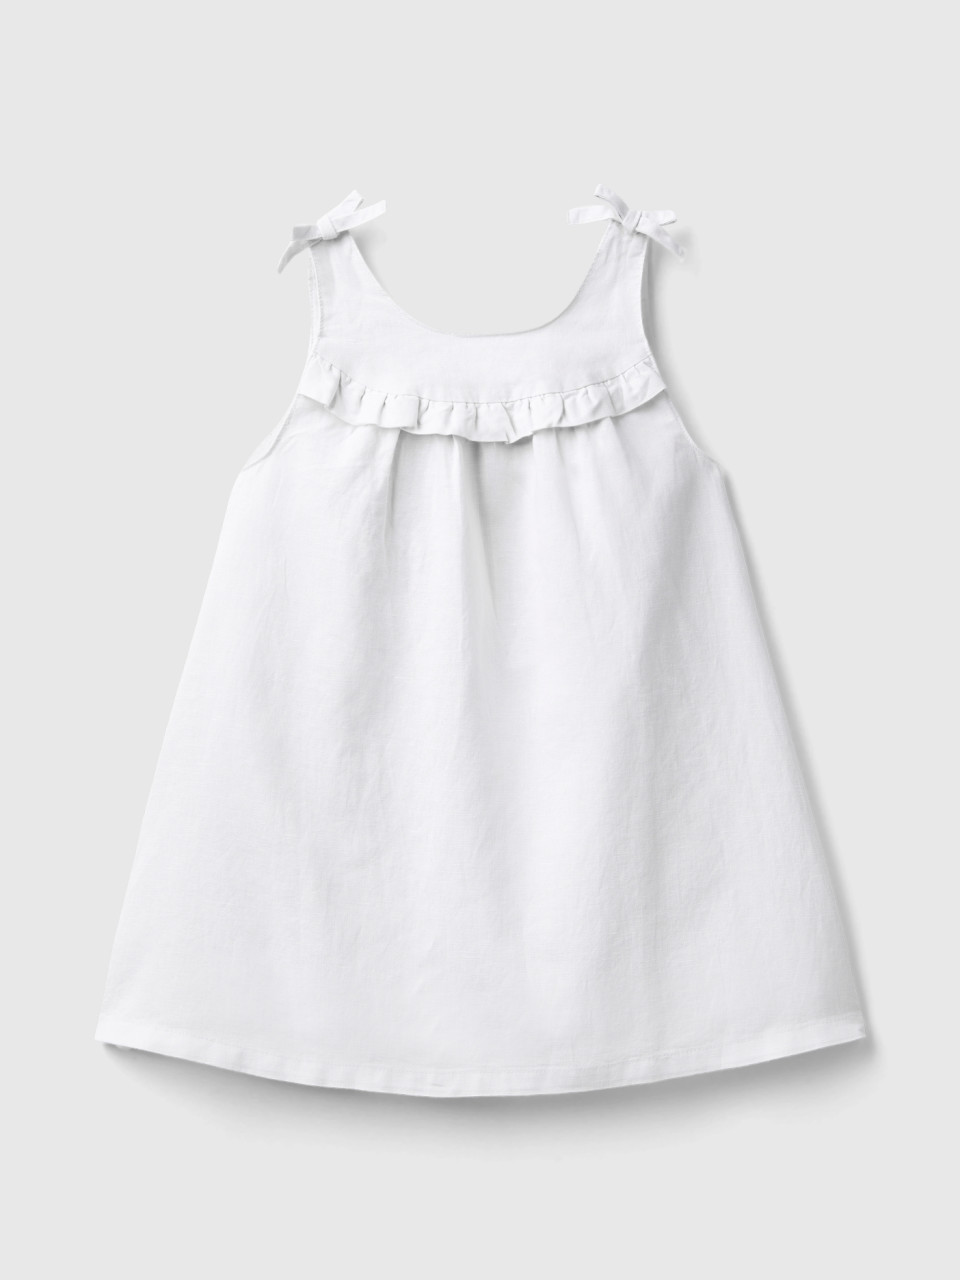 Benetton, Linen Blend Dress With Rouches, White, Kids